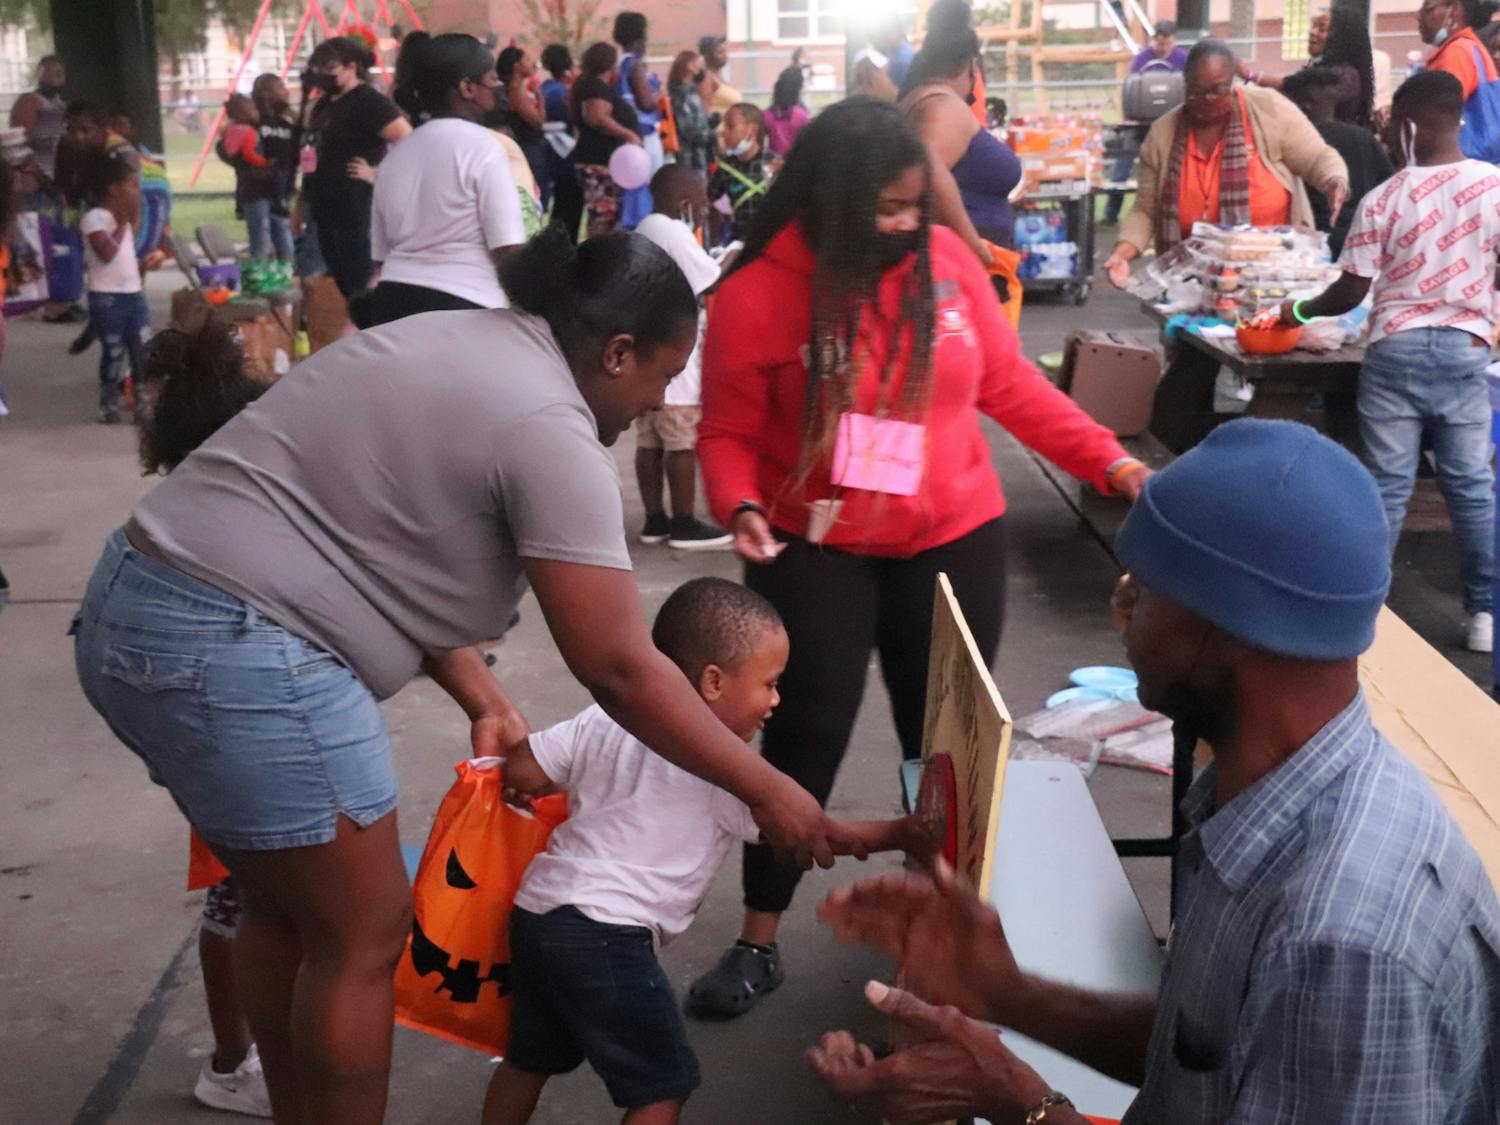 Kids play games during Youth Night and Community Fall Festival at Duval Early Learning Academy on Thursday, Oct. 28, 2021. The festival was meant to bring children together with rising gun violence among youth.